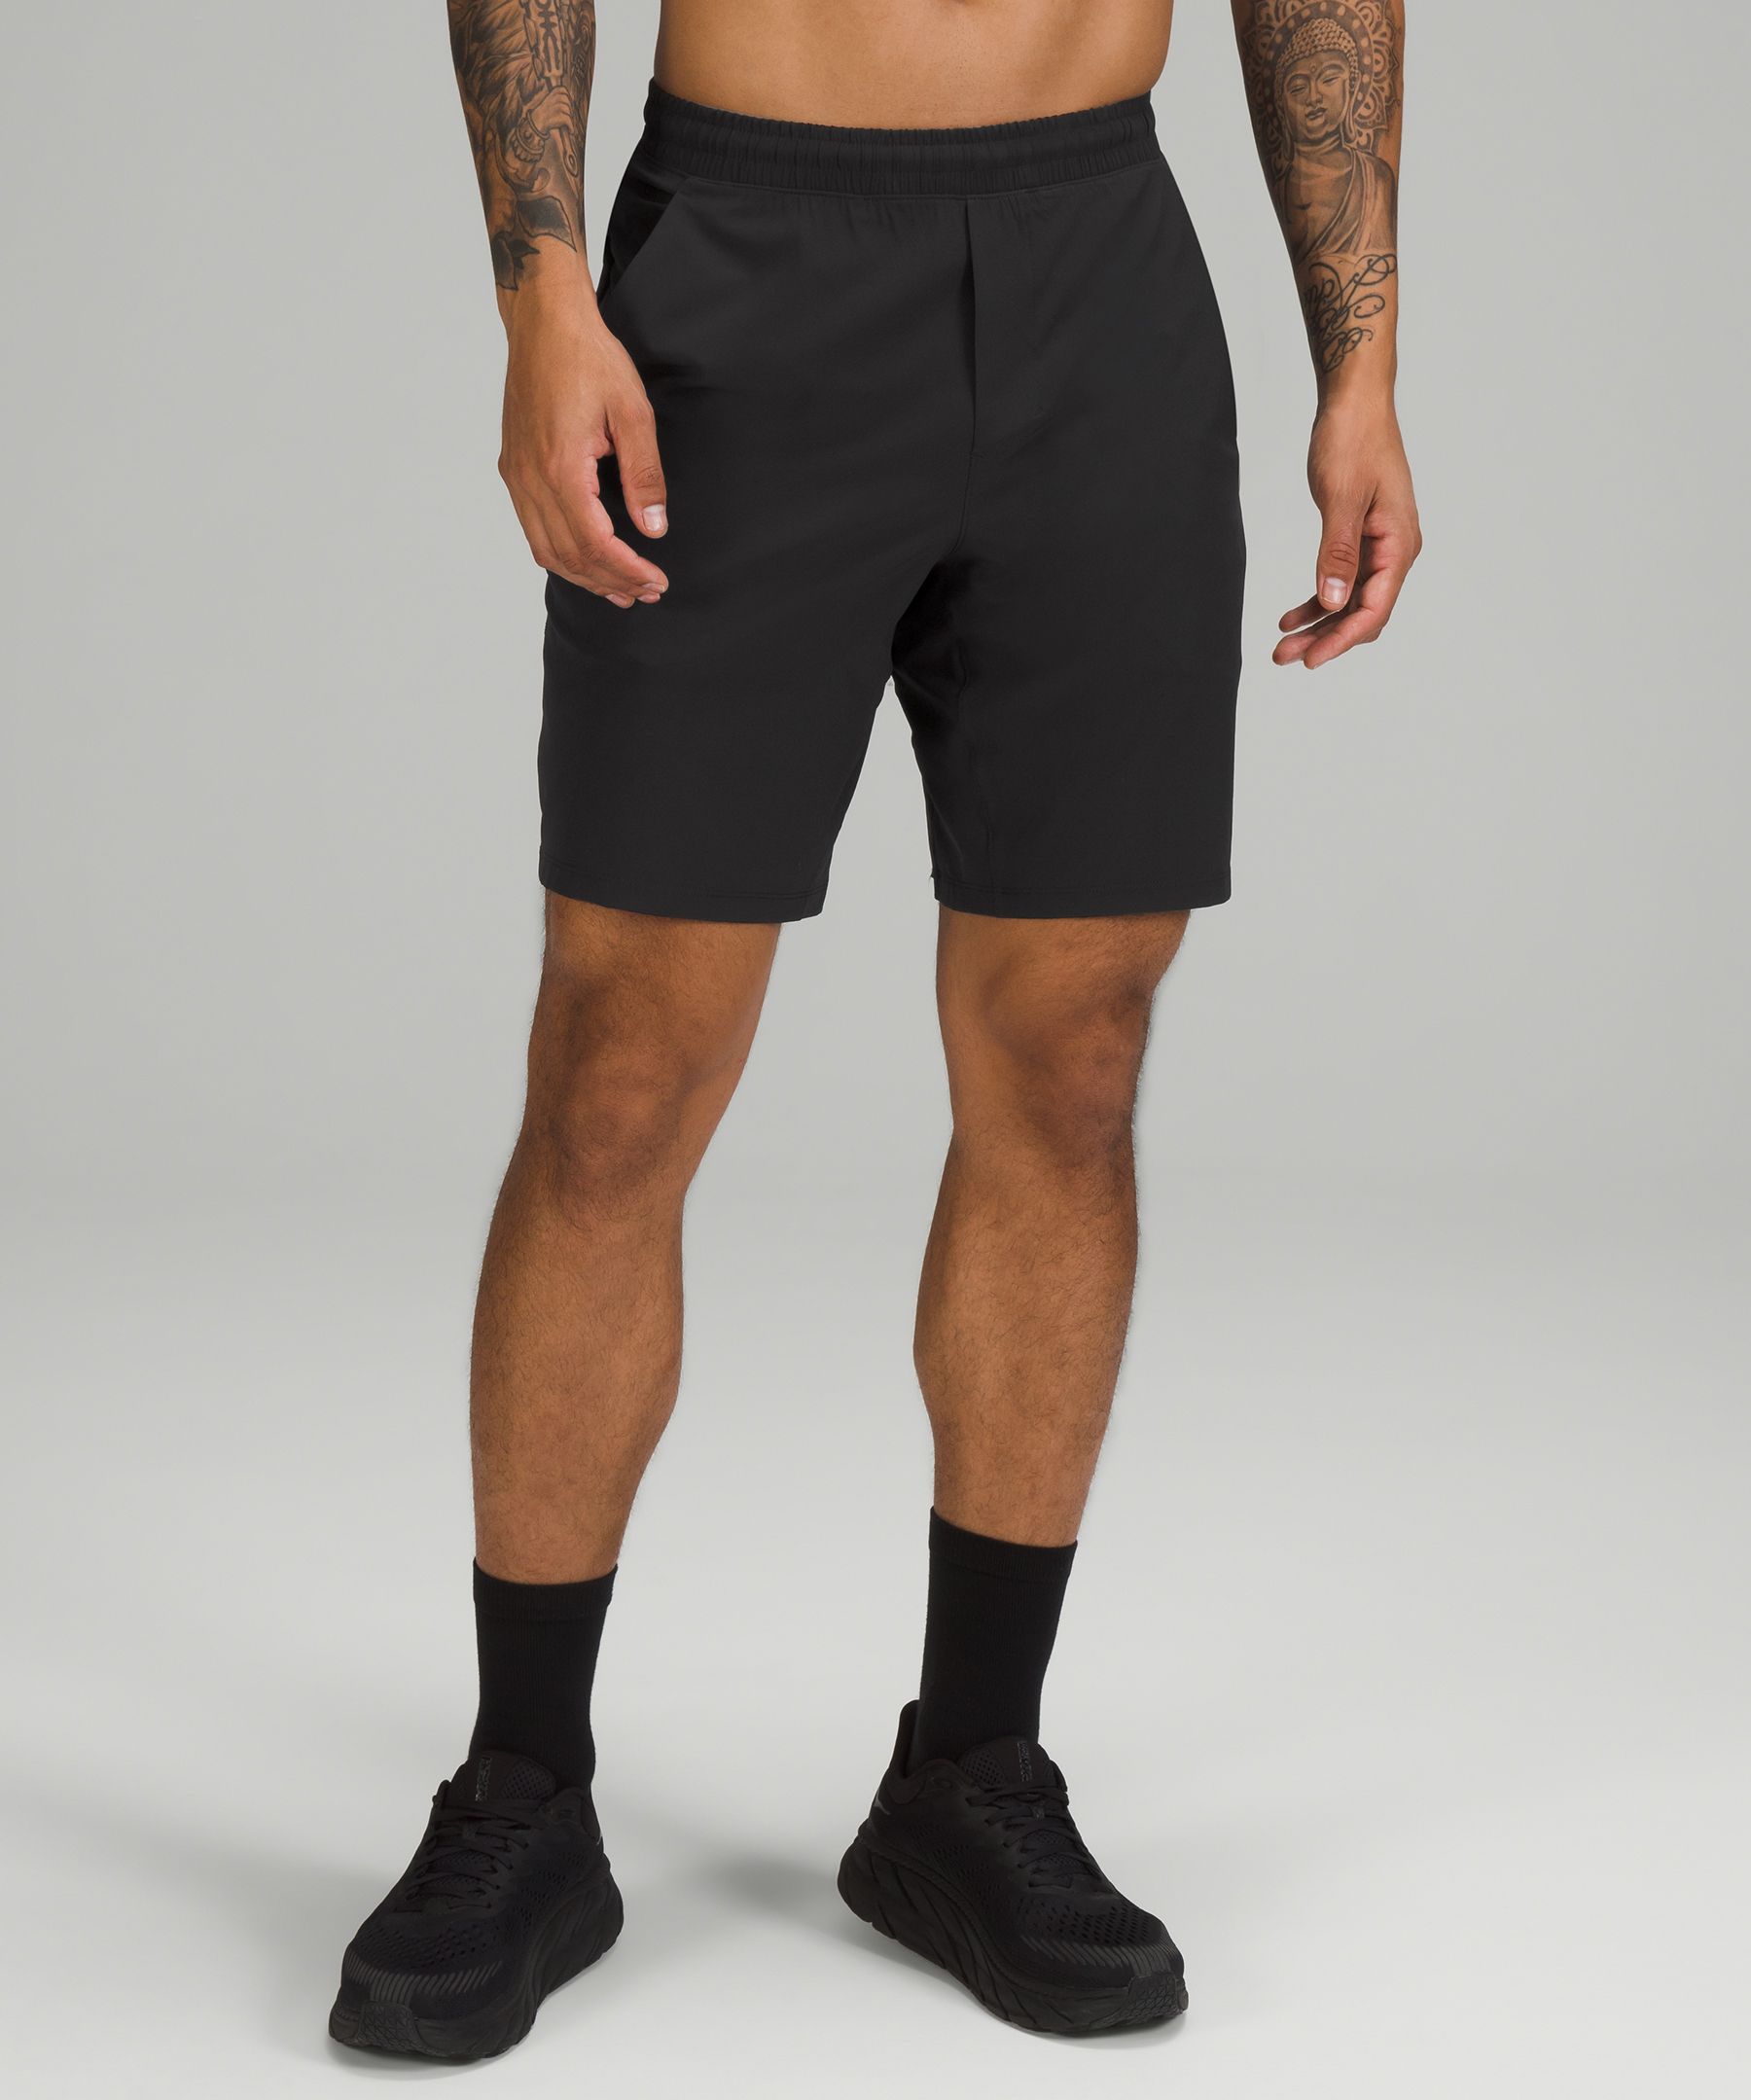 How To Wear A Compression Short For The Best Outfit - The Kosha Journal